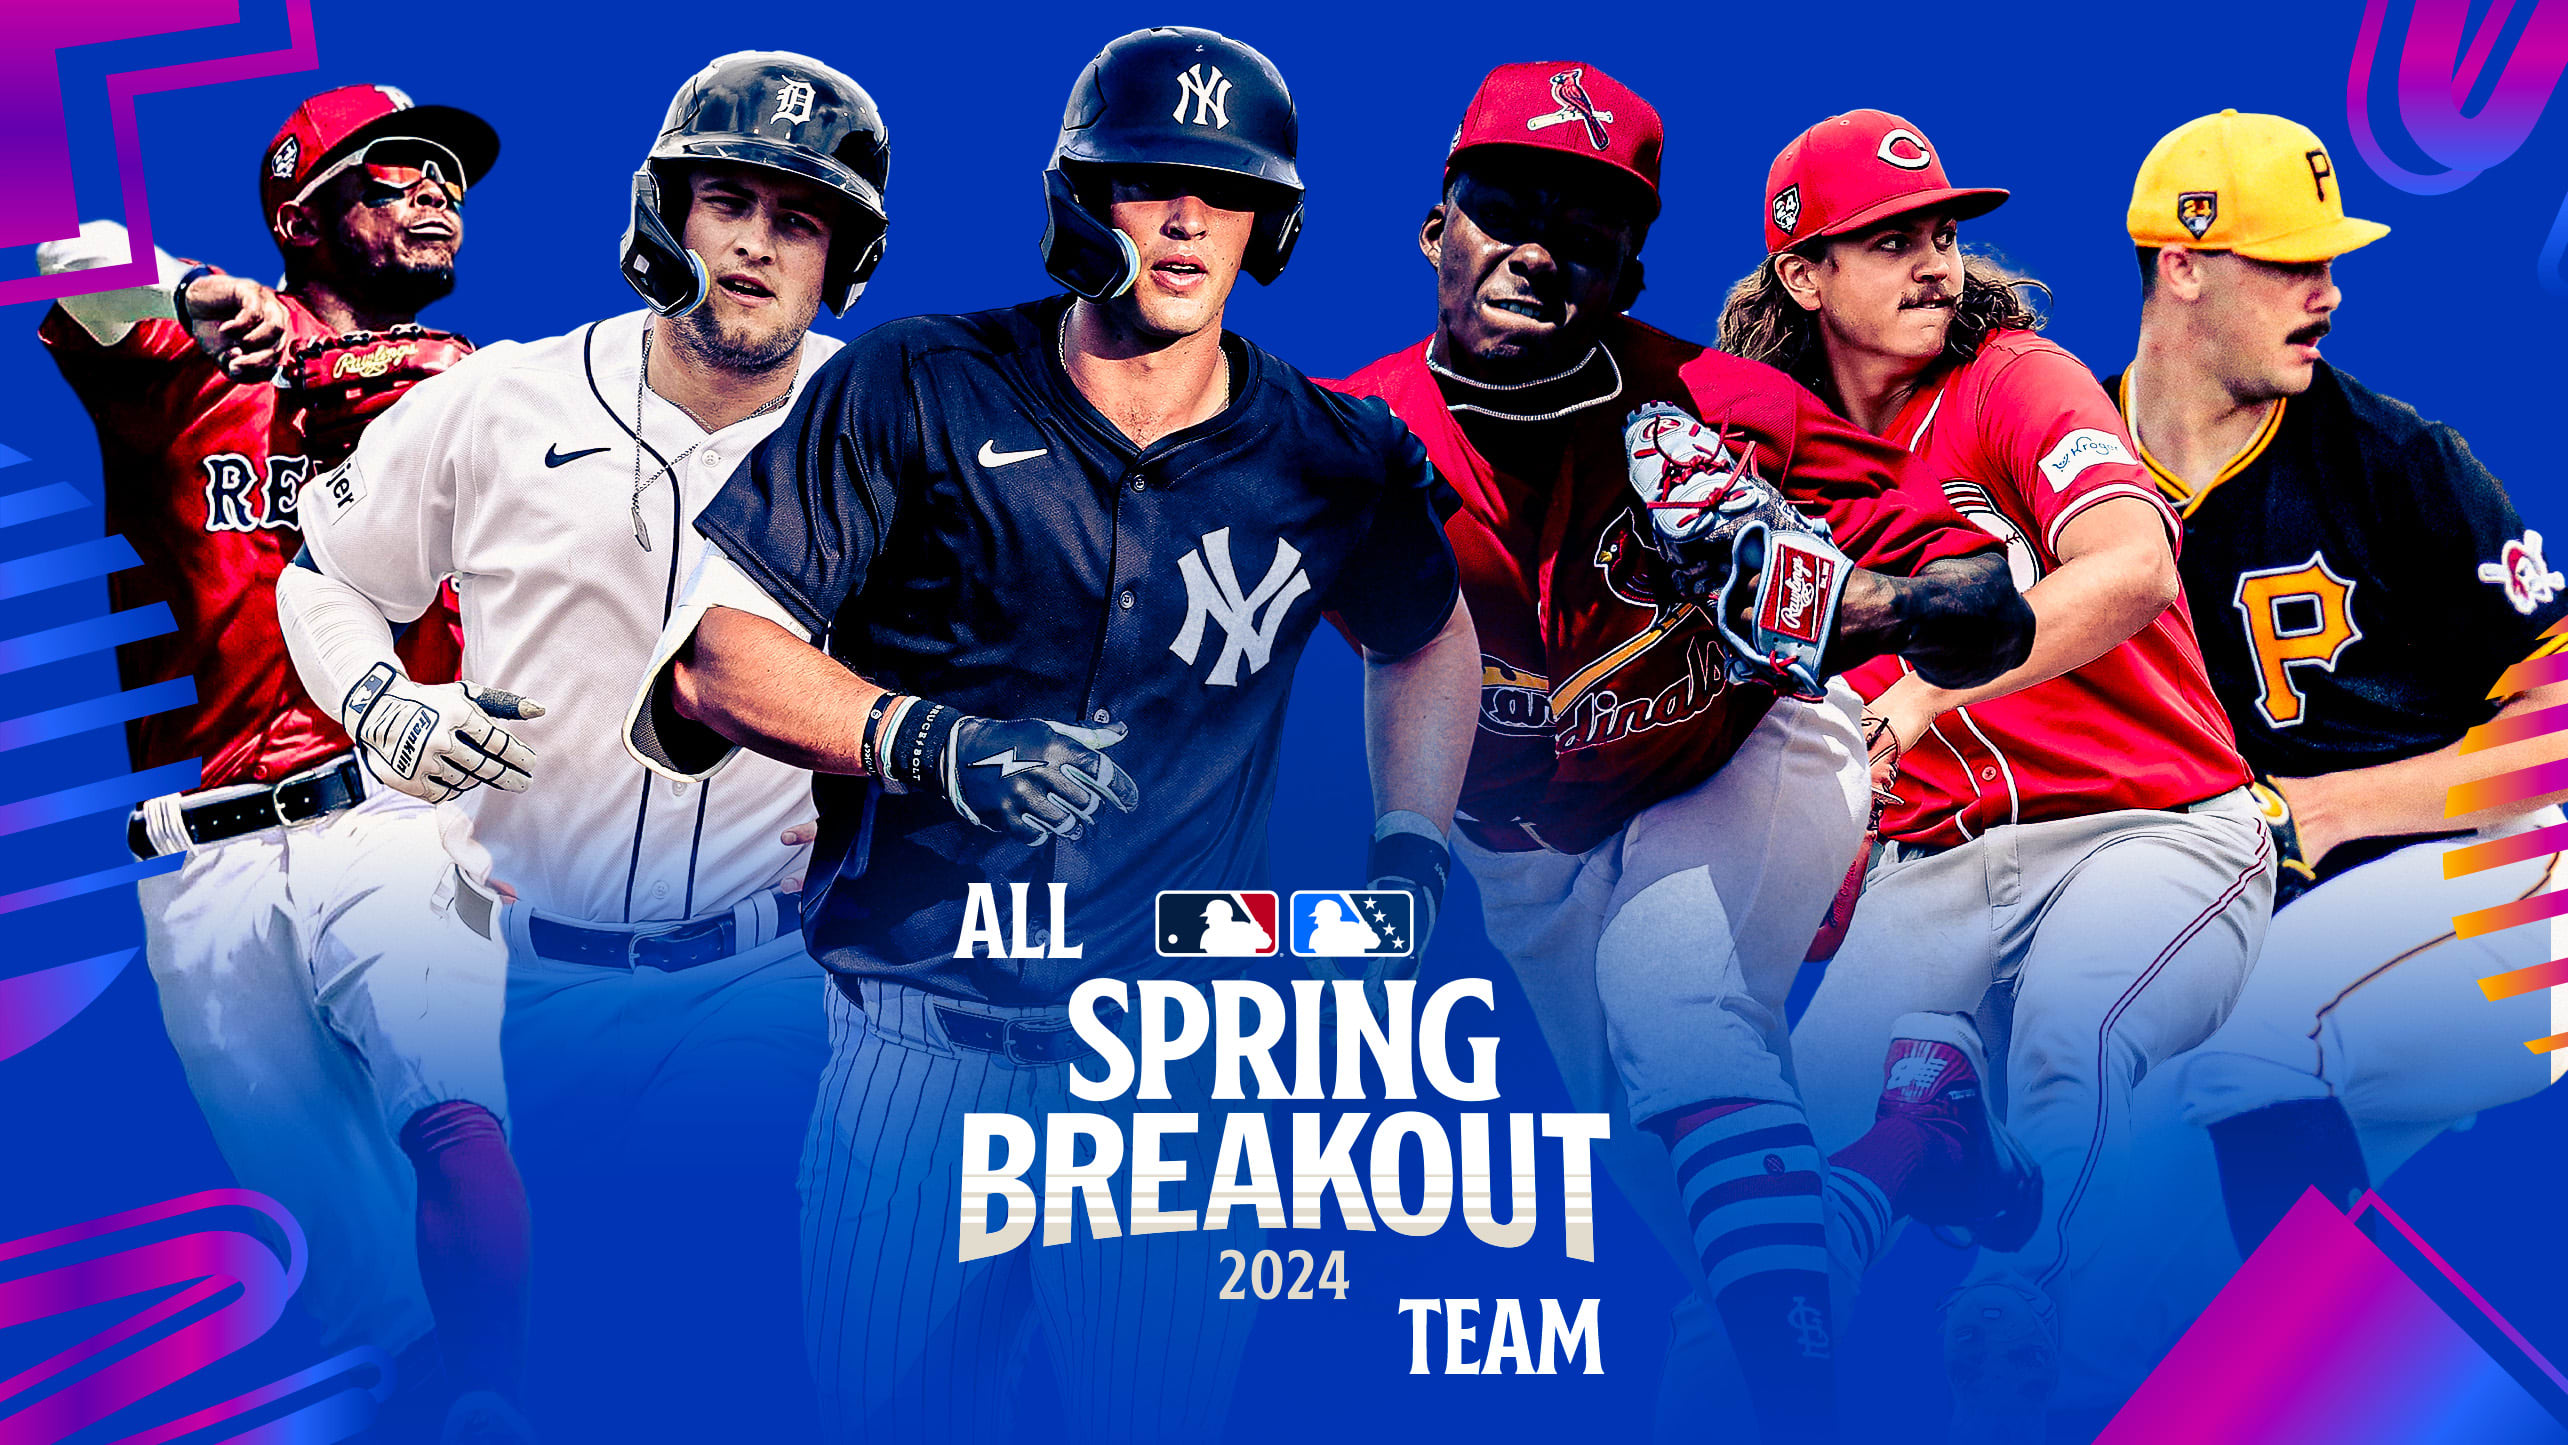 In total, 30 players made MLB's All-Spring Breakout Team